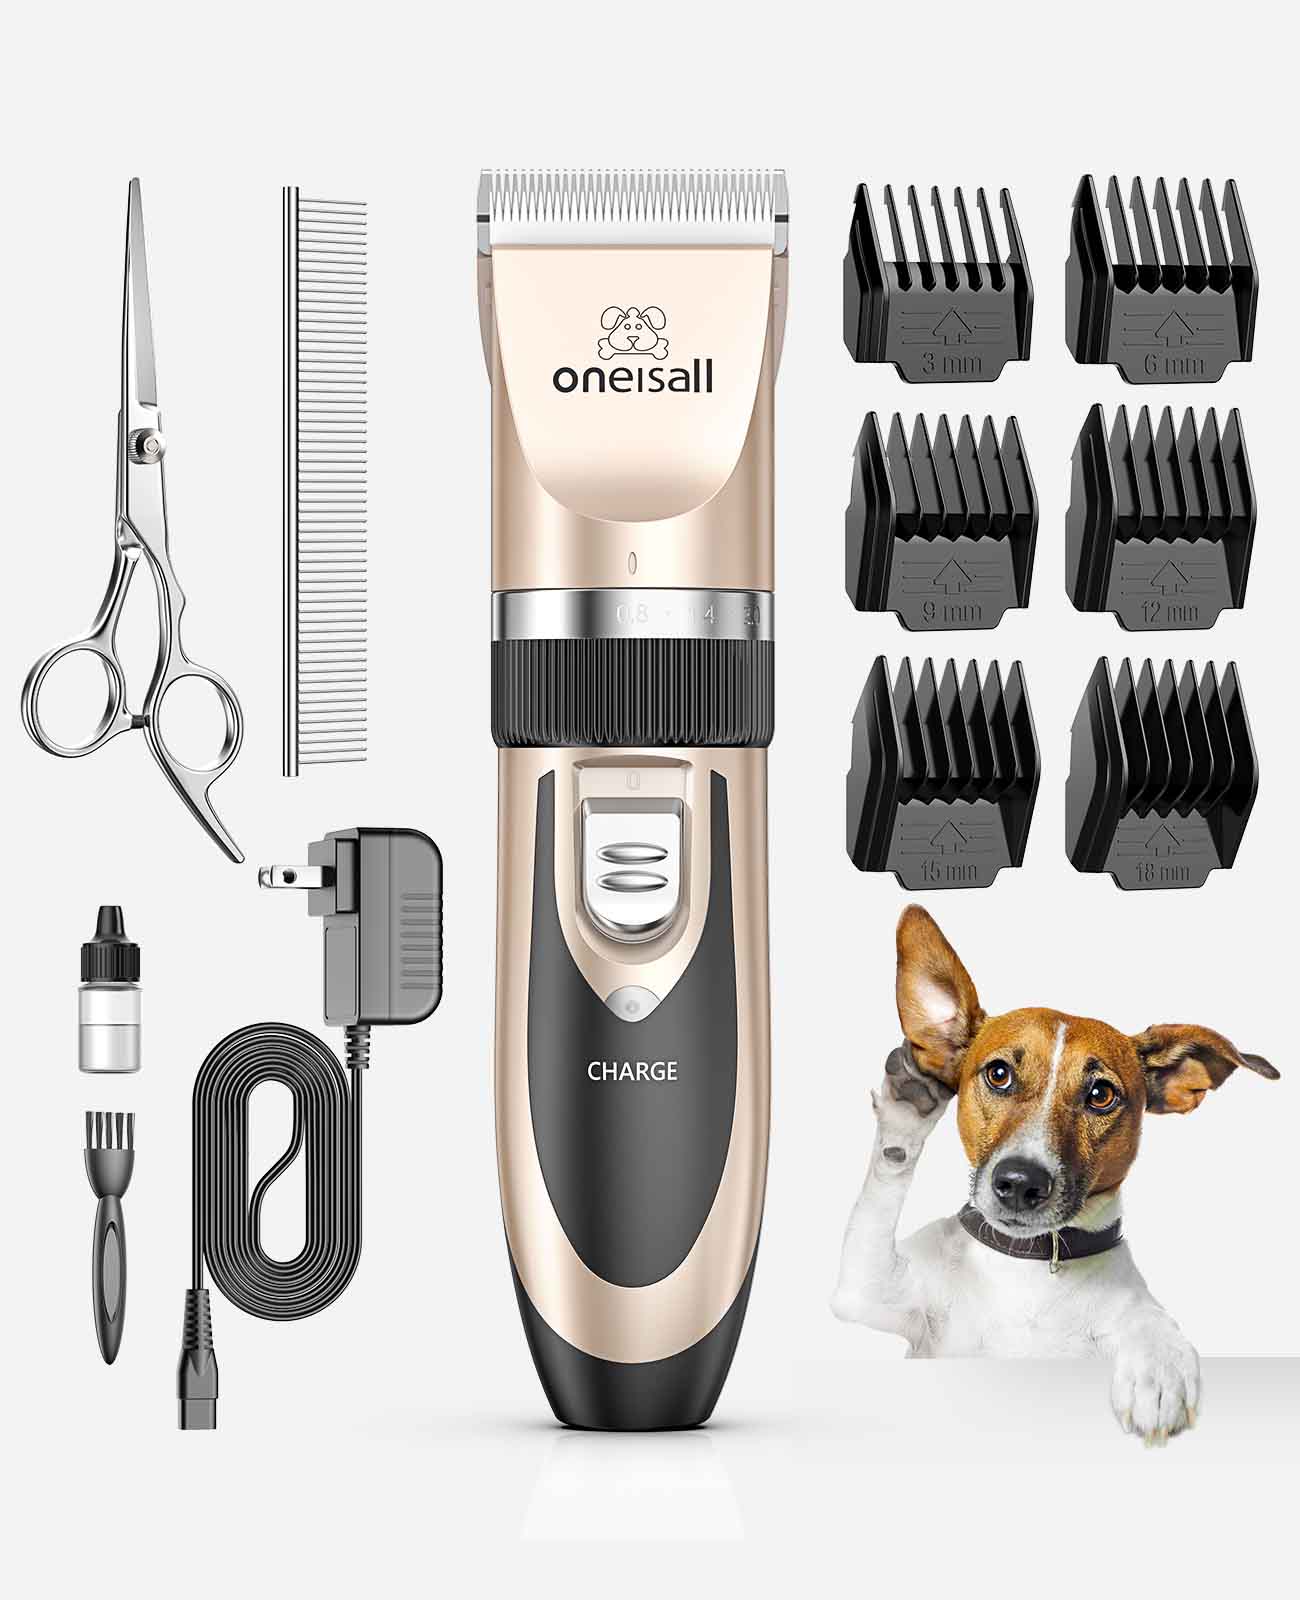 P2 - Oneisall Dog Clippers Cordless Rechargeable